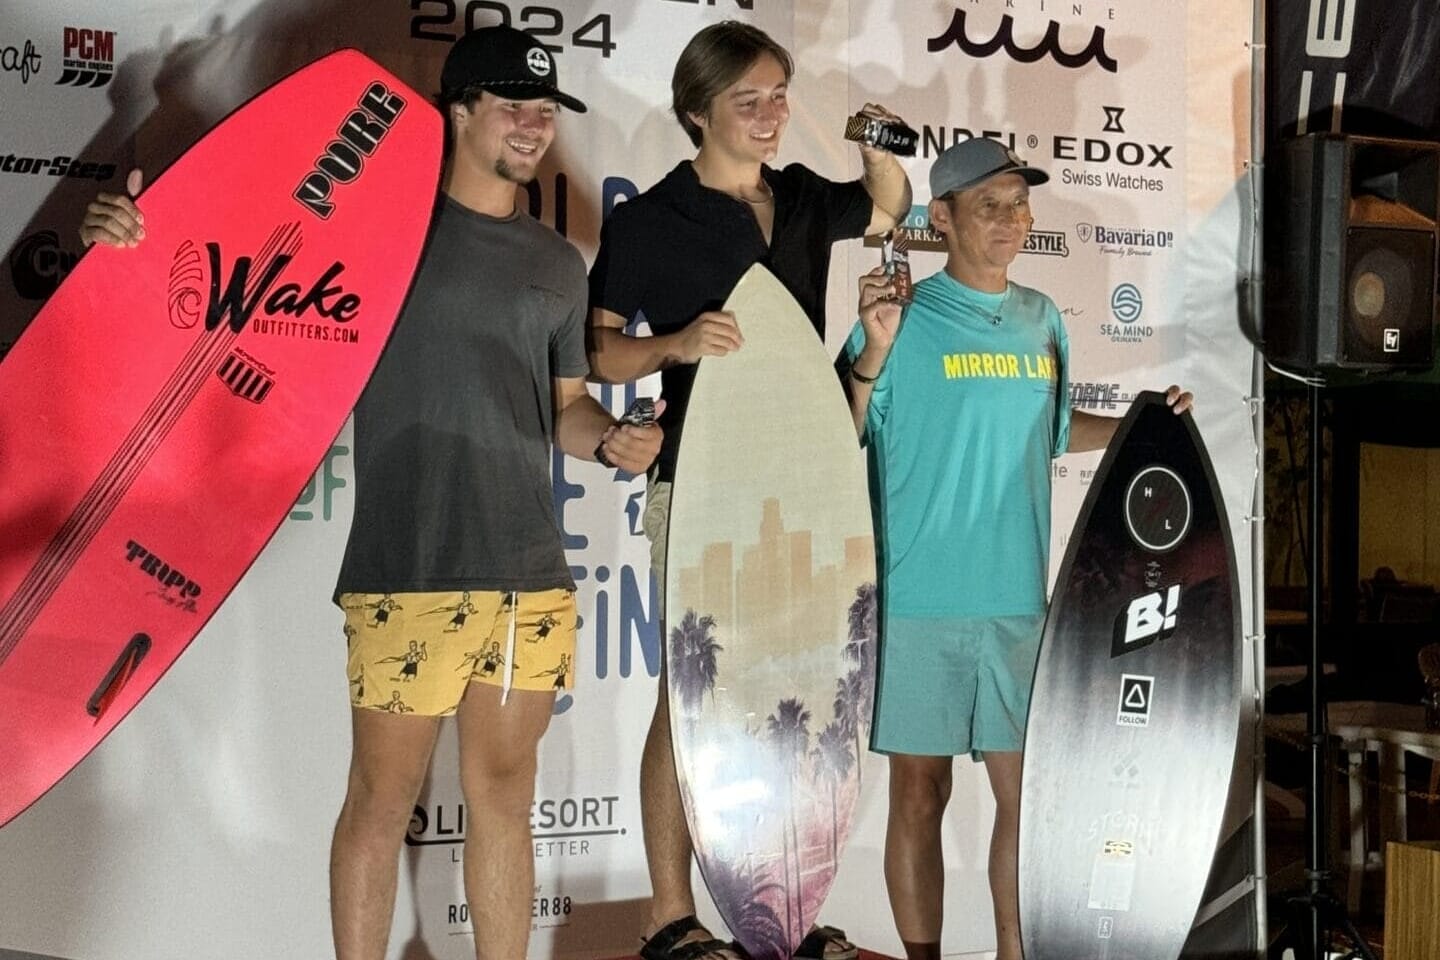 Three people stand on a winners' podium at the Centurion Wake Surf Japan Open 2024, each holding surfboards and trophies. The backdrop features event and sponsor logos.